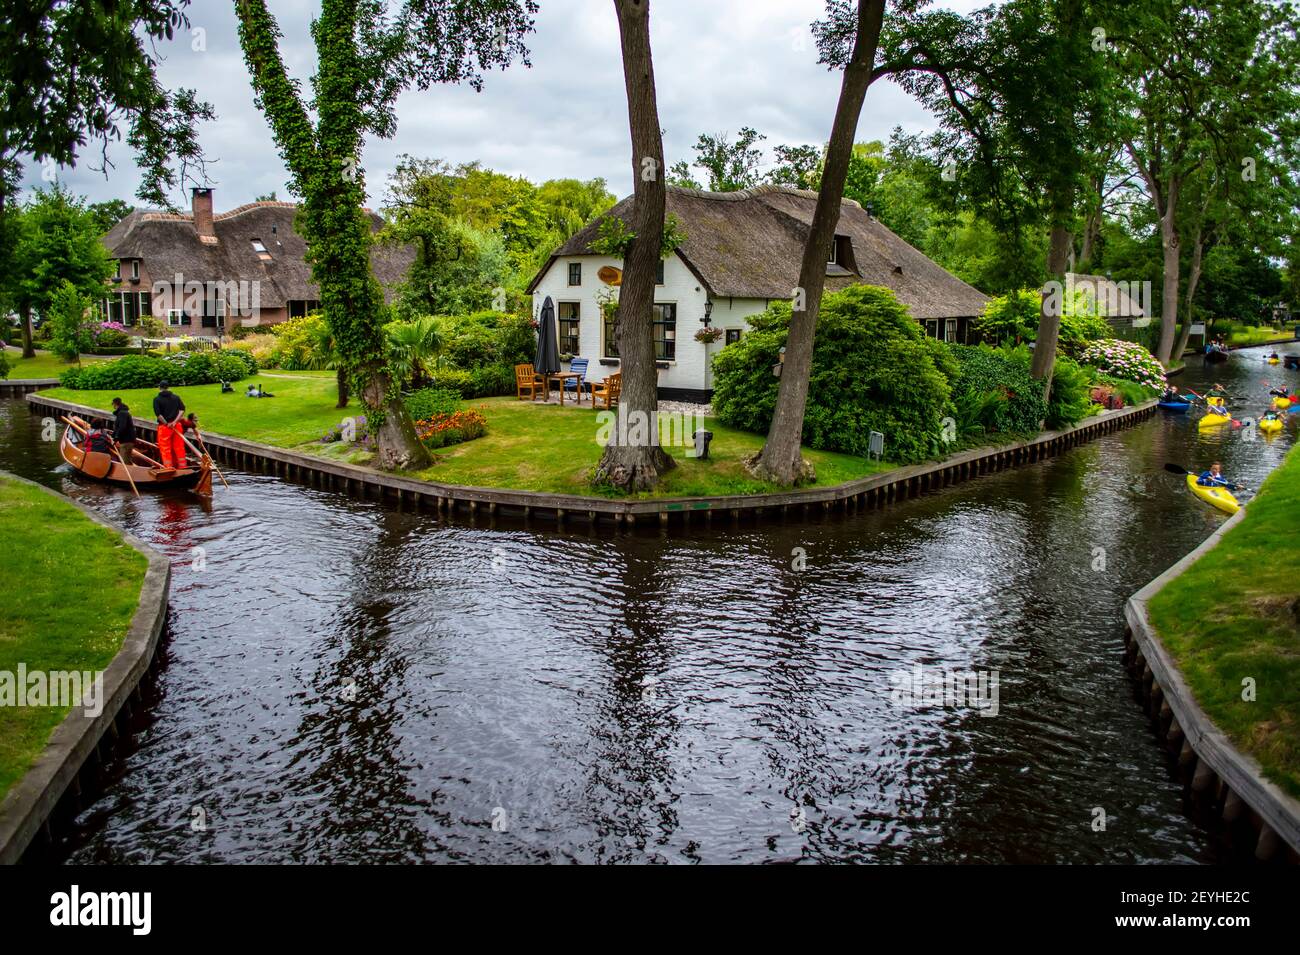 Giethoorn, Netherlands - July 6, 2019: People paddling boats on the canals of Giethoorn village, known as the Venice of the Netherlands Stock Photo